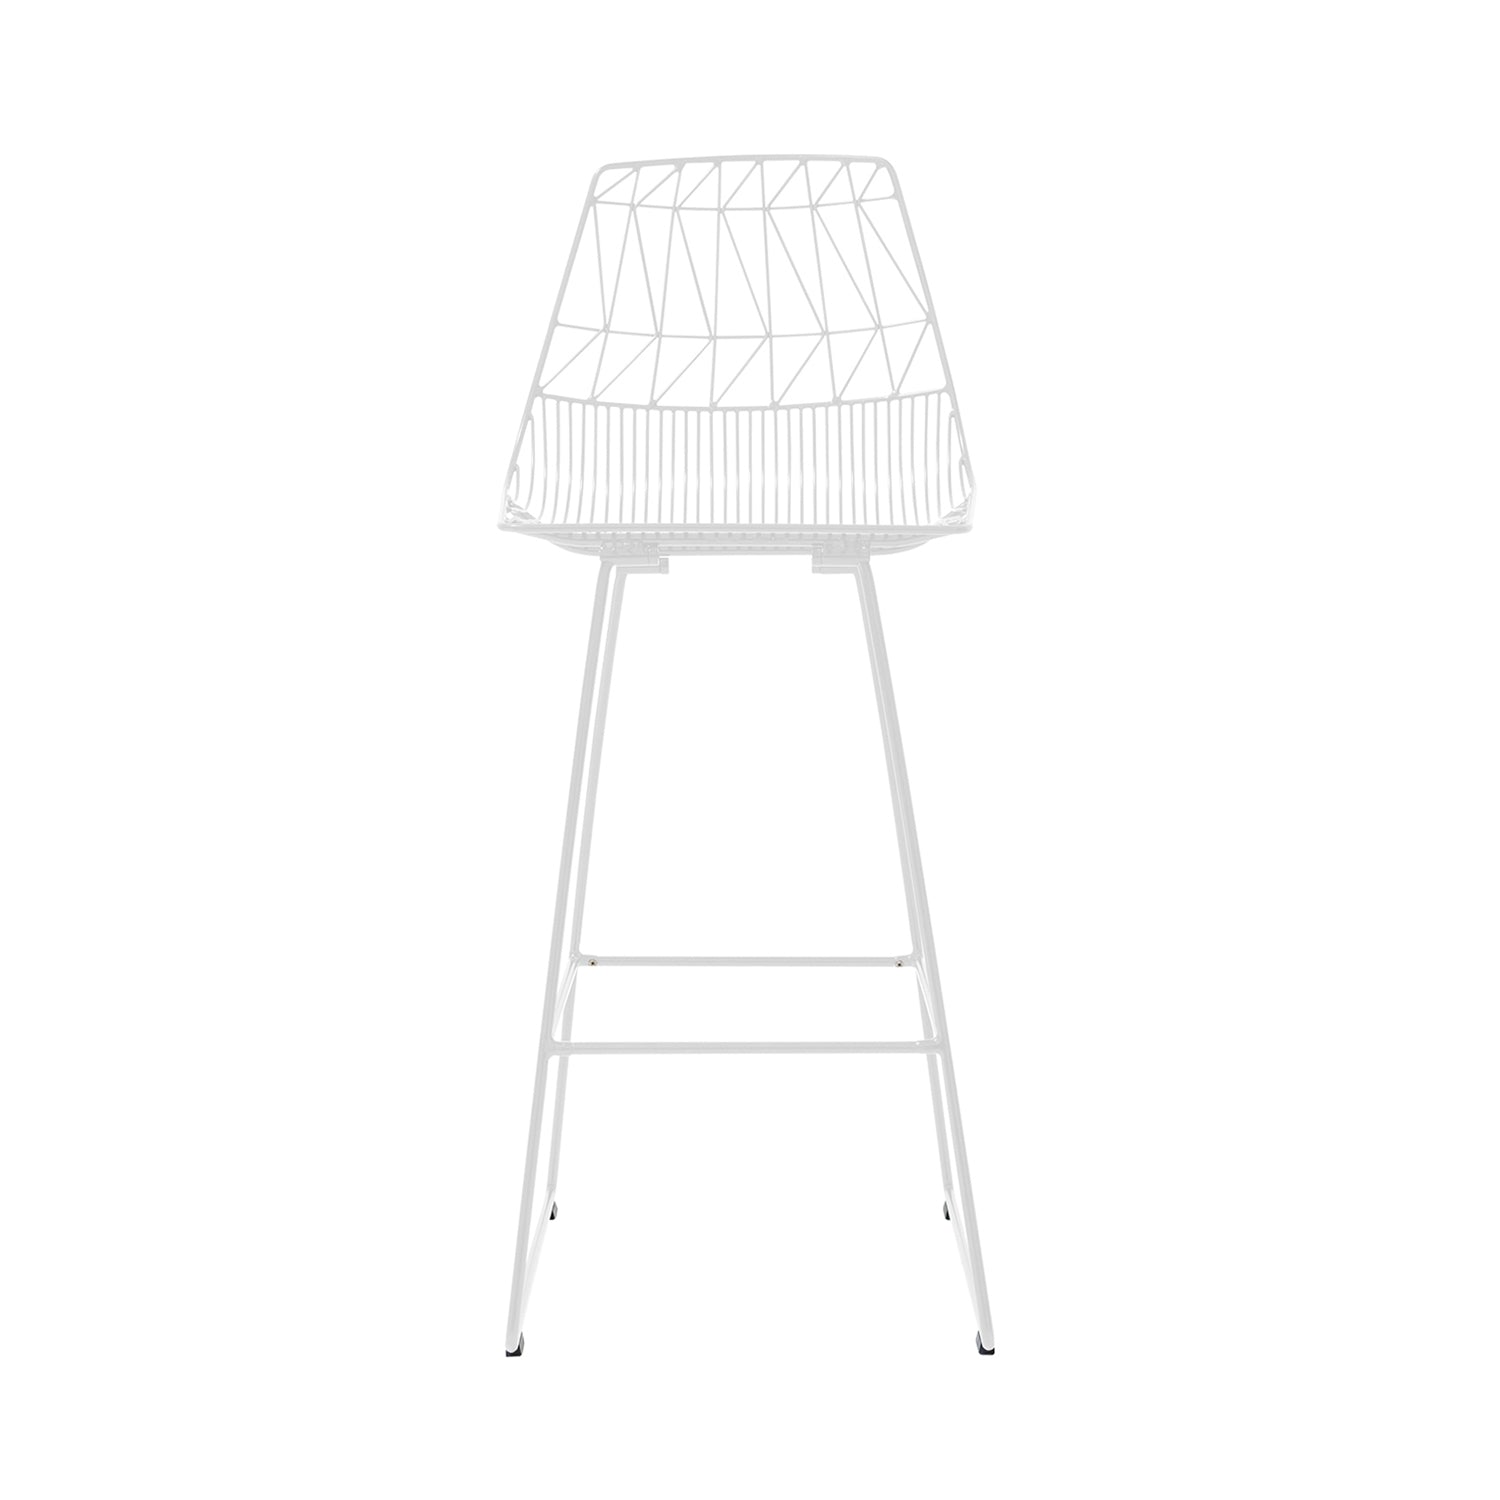 Lucy Bar Stool: Color + White + Without Seat Pad